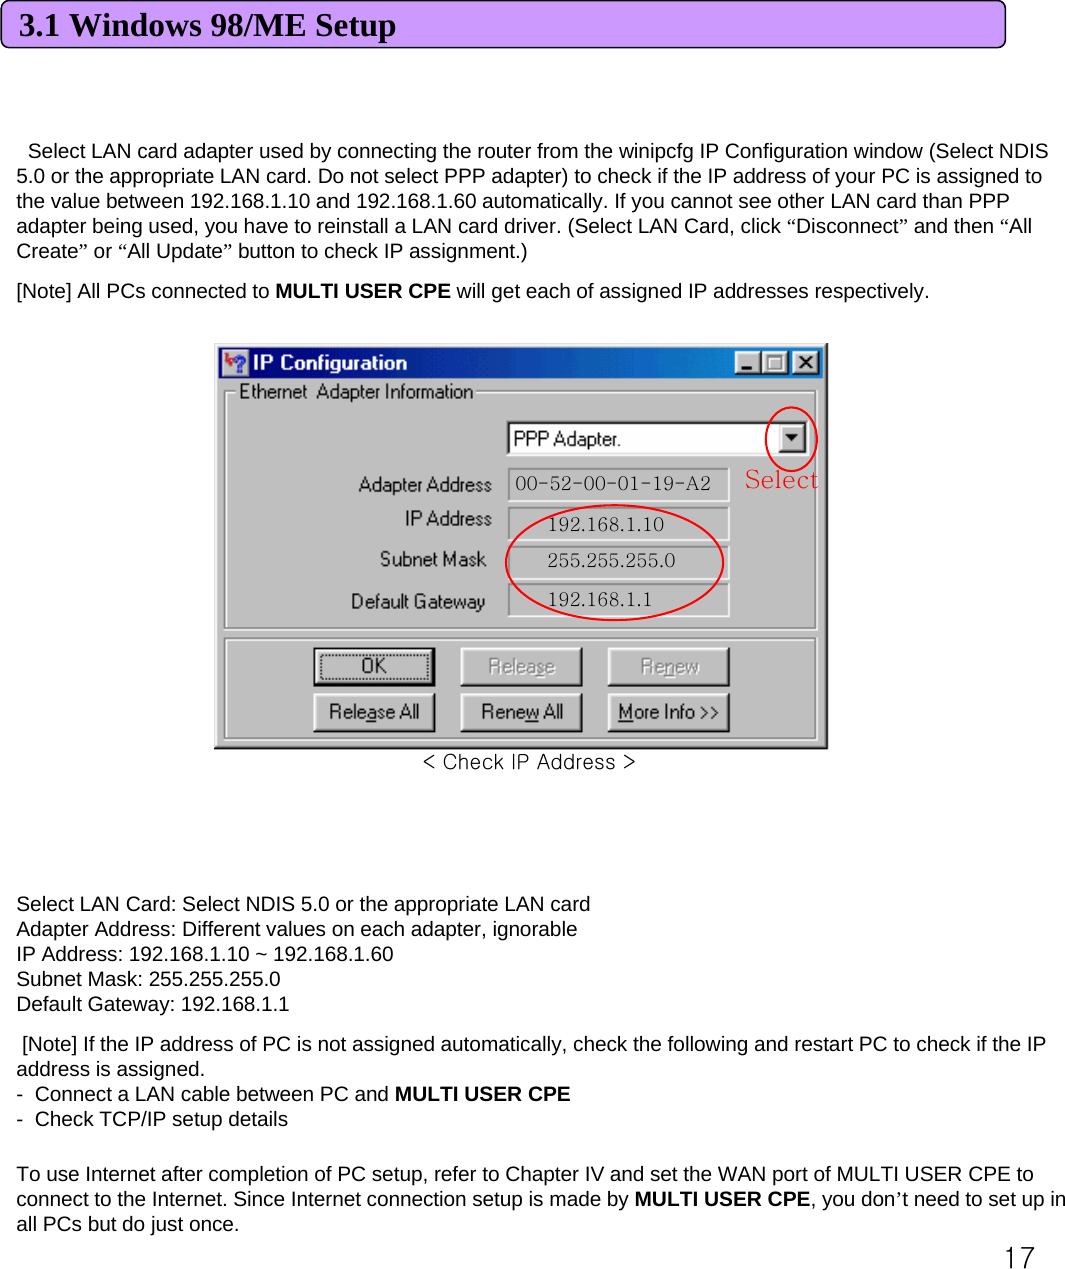 173.1 Windows 98/ME SetupSelect LAN card adapter used by connecting the router from the winipcfg IP Configuration window (Select NDIS 5.0 or the appropriate LAN card. Do not select PPP adapter) to check if the IP address of your PC is assigned to the value between 192.168.1.10 and 192.168.1.60 automatically. If you cannot see other LAN card than PPP adapter being used, you have to reinstall a LAN card driver. (Select LAN Card, click “Disconnect”and then “All Create”or “All Update”button to check IP assignment.) [Note] All PCs connected to MULTI USER CPE will get each of assigned IP addresses respectively. 00-52-00-01-19-A2192.168.1.10255.255.255.0192.168.1.1SelectSelect LAN Card: Select NDIS 5.0 or the appropriate LAN cardAdapter Address: Different values on each adapter, ignorableIP Address: 192.168.1.10 ~ 192.168.1.60Subnet Mask: 255.255.255.0Default Gateway: 192.168.1.1[Note] If the IP address of PC is not assigned automatically, check the following and restart PC to check if the IP address is assigned. - Connect a LAN cable between PC and MULTI USER CPE- Check TCP/IP setup detailsTo use Internet after completion of PC setup, refer to Chapter IV and set the WAN port of MULTI USER CPE to connect to the Internet. Since Internet connection setup is made by MULTI USER CPE, you don’t need to set up in all PCs but do just once. &lt; Check IP Address &gt;